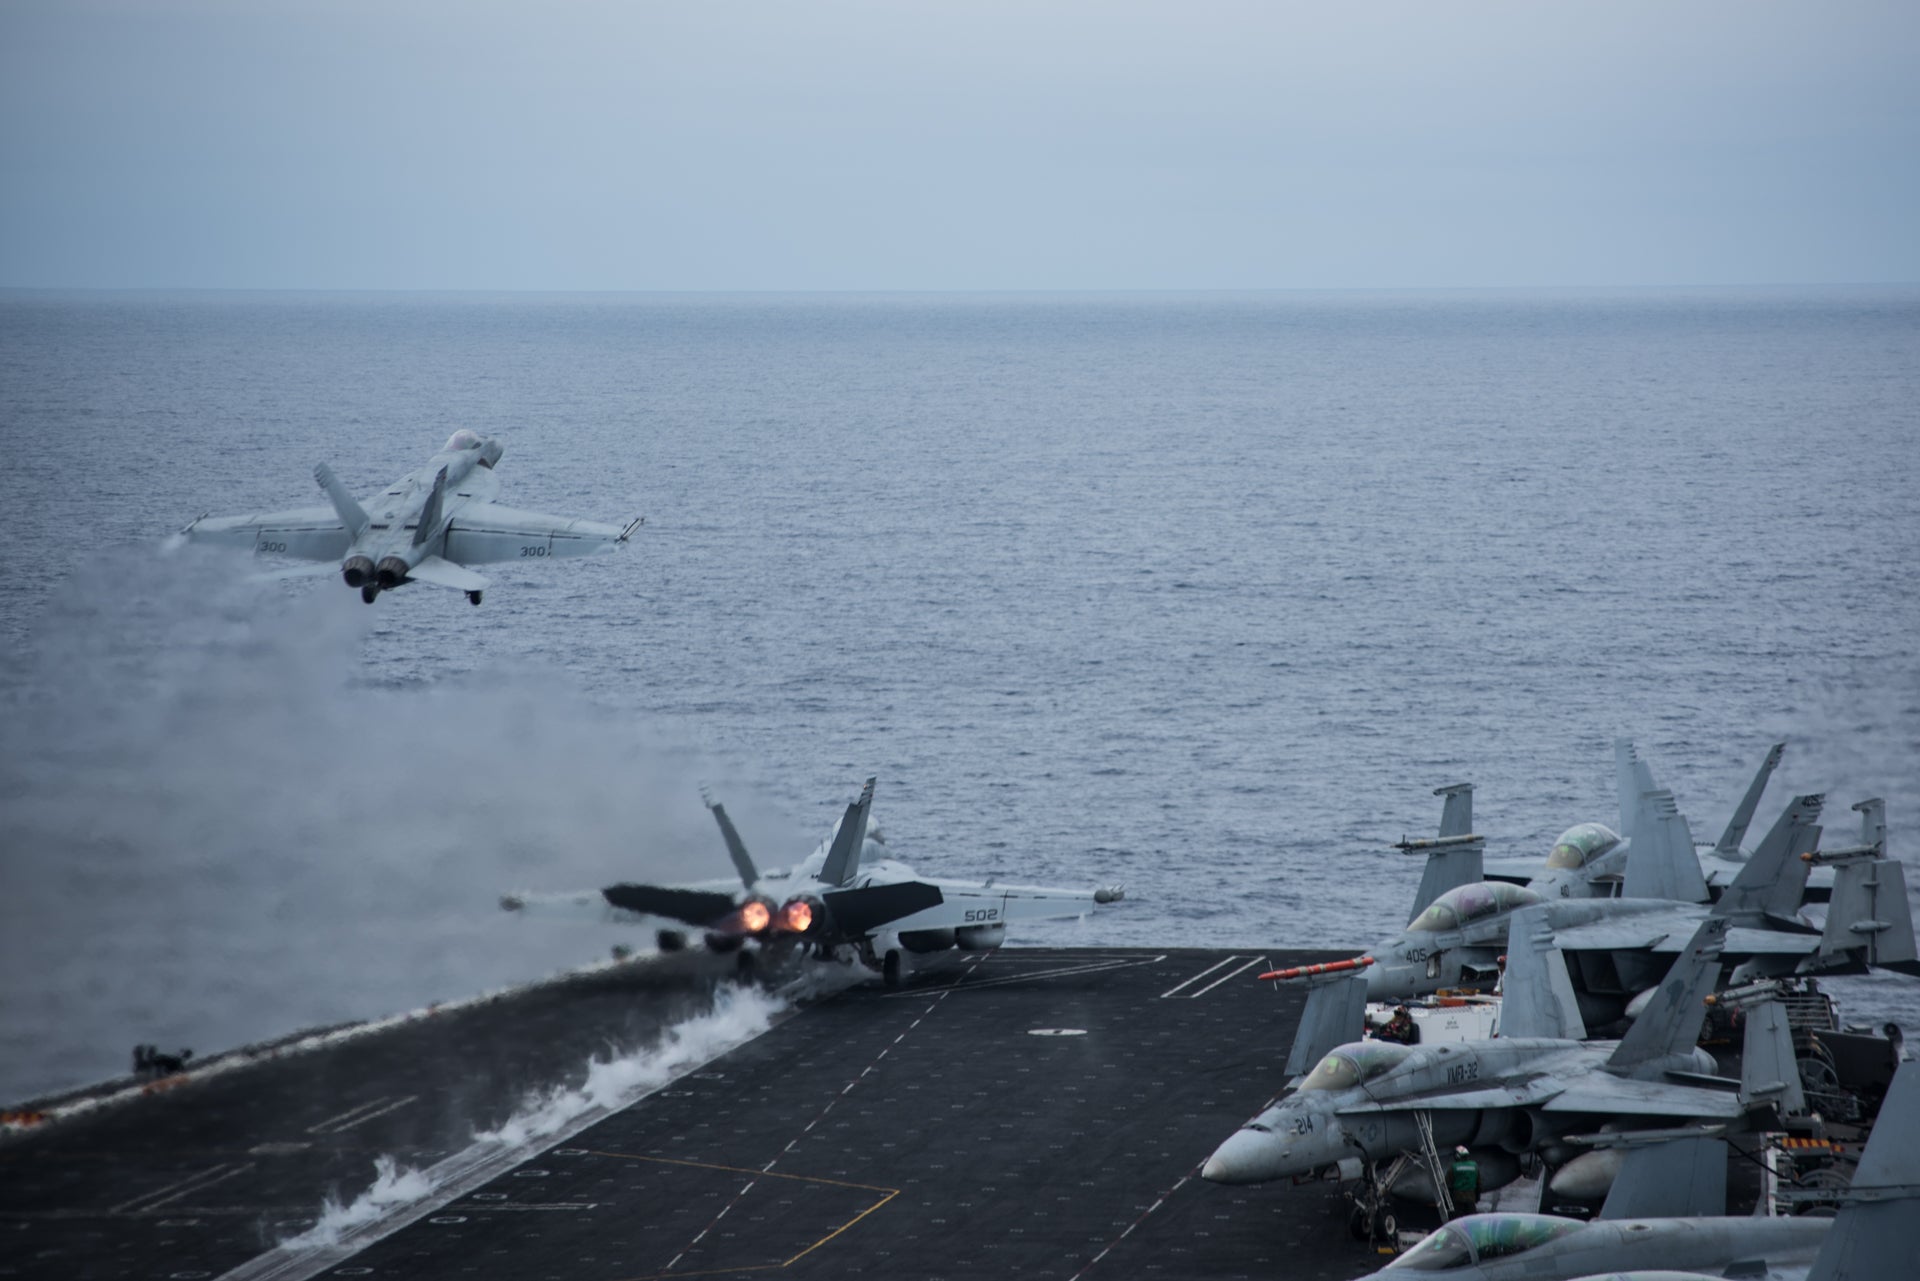 170819-N-FP690-142 
PACIFIC OCEAN (Aug. 19, 2017) Two F/A-18 Super Hornets take off from the flight deck of the aircraft carrier USS Theodore Roosevelt (CVN 71). Theodore Roosevelt is underway conducting a composite training unit exercise (COMPTUEX) with its carrier strike group in preparation for an upcoming deployment. COMPTUEX tests a carrier strike group's mission readiness and ability to perform as an integrated unit through simulated real-world scenarios. (U.S. Navy photo by Mass Communication Specialist 3rd Class Robyn B. Melvin/Released)